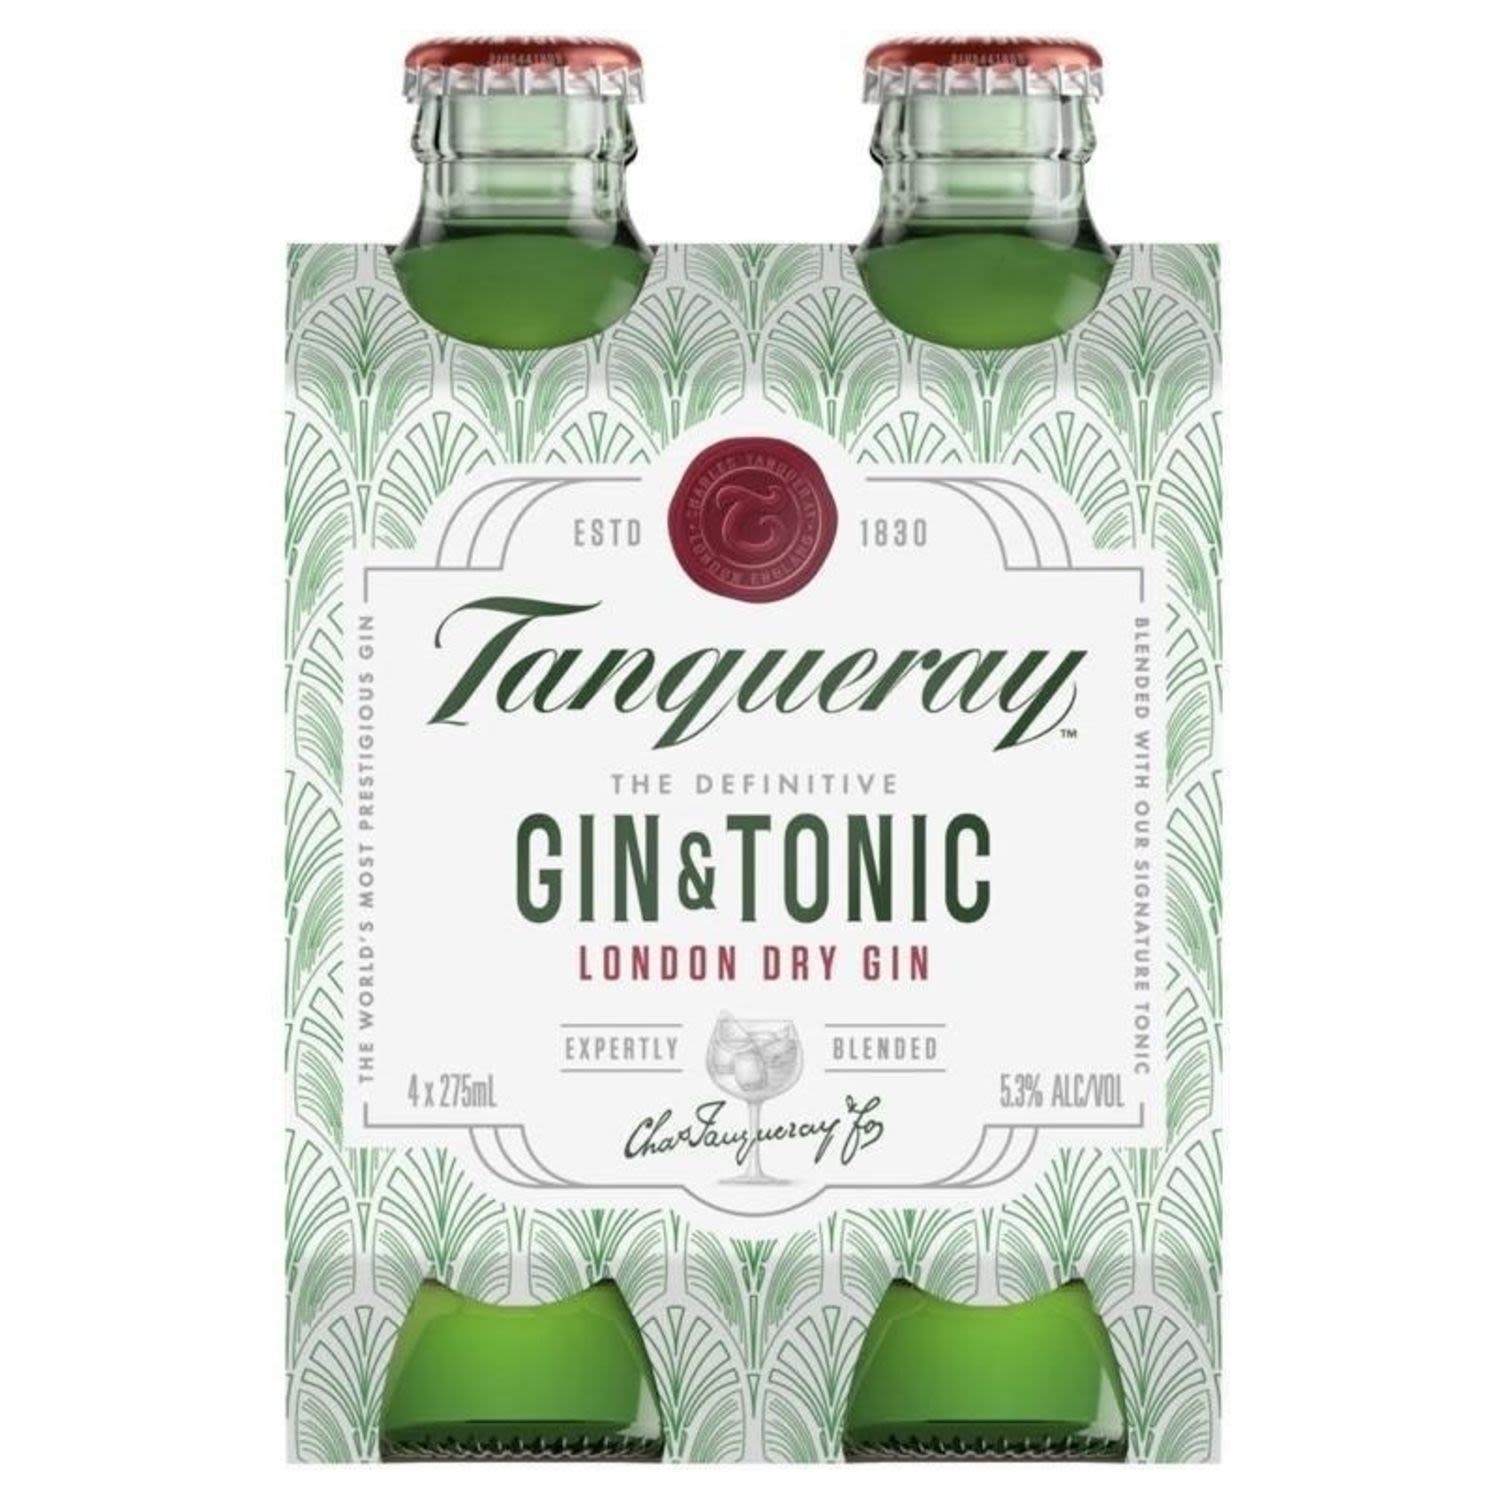 Tanqueray Gin & Tonic Bottle 275mL 4 Pack